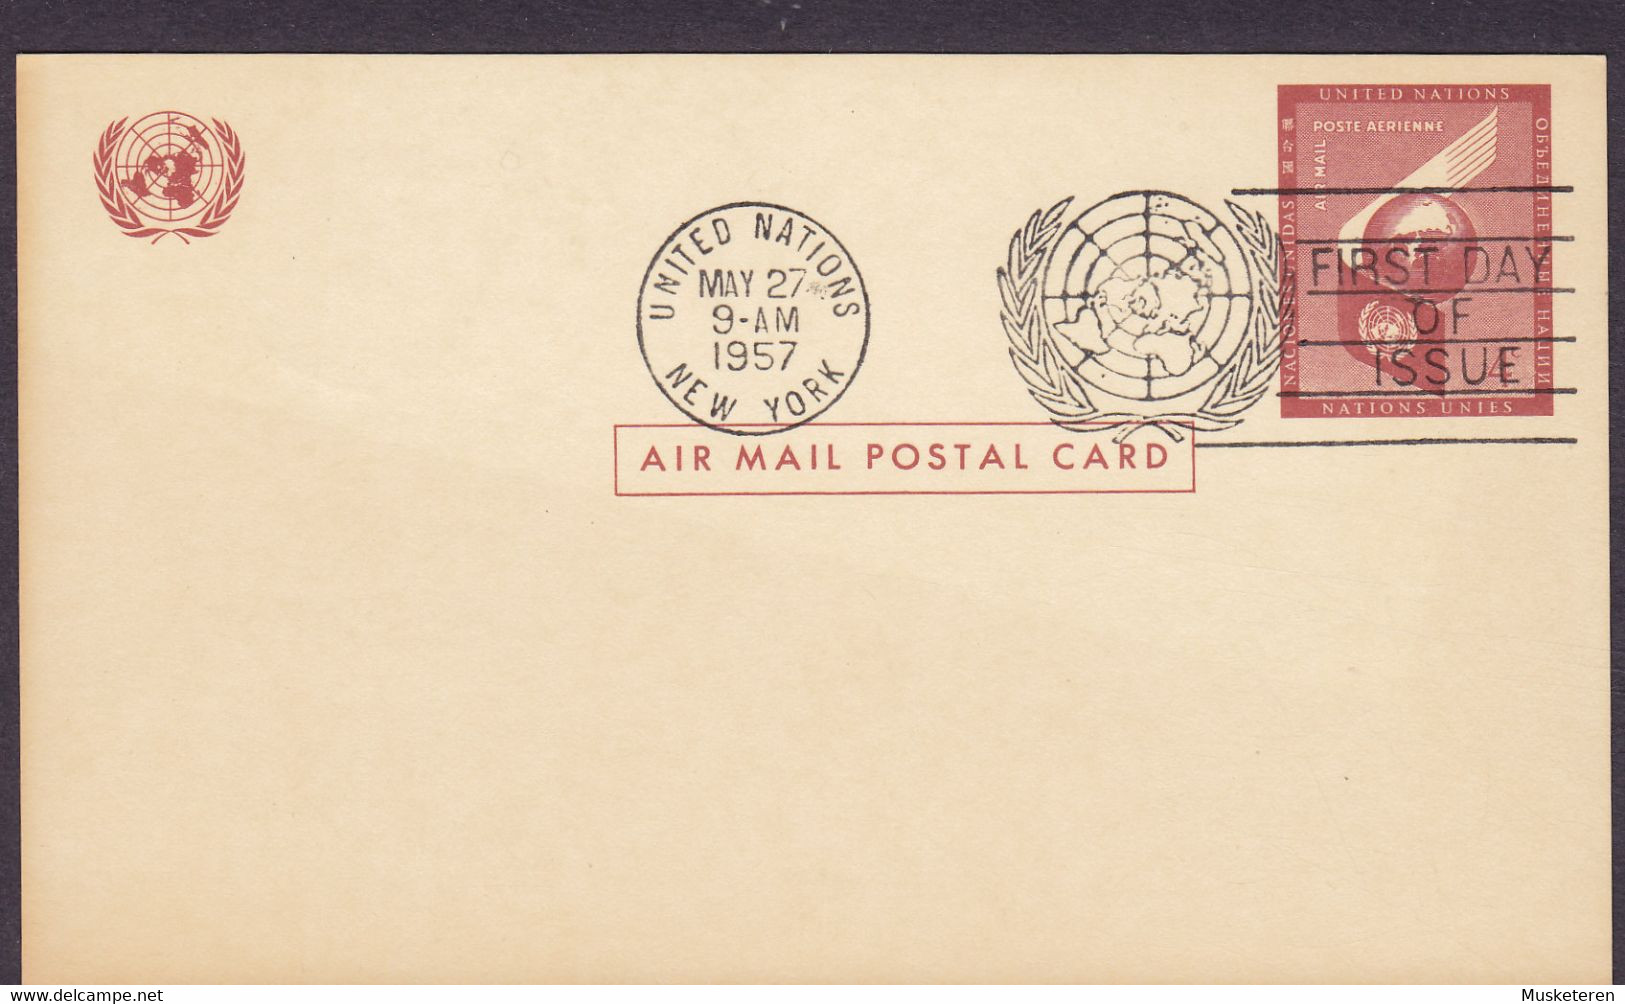 United Nations Postal Stationery Ganzsache Entier NEW YORK First Day Of Issue 1957 Air Mail Postal Card - Covers & Documents